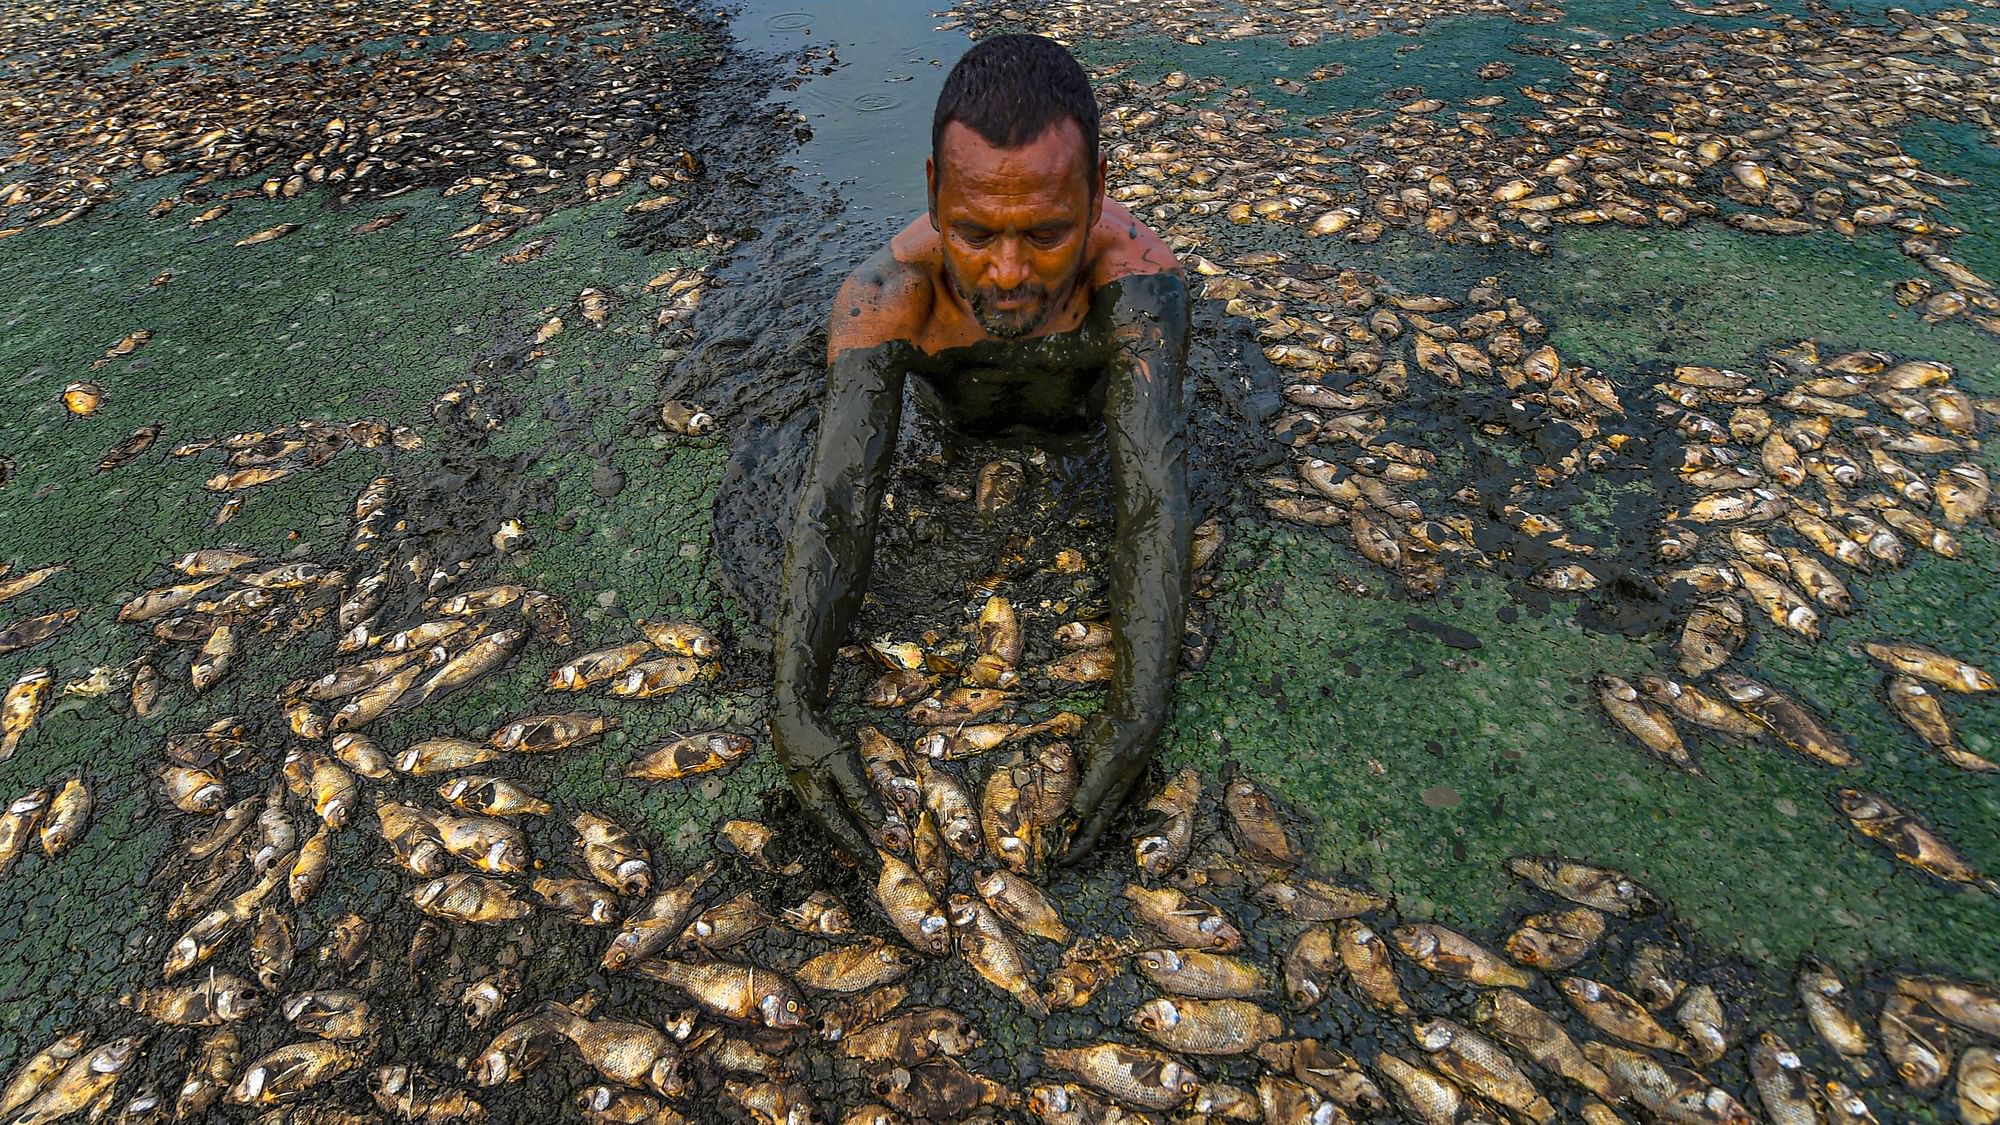 Fish that are believed to have died in the drying Lake Thiruneermalai due to lack of rainfall.